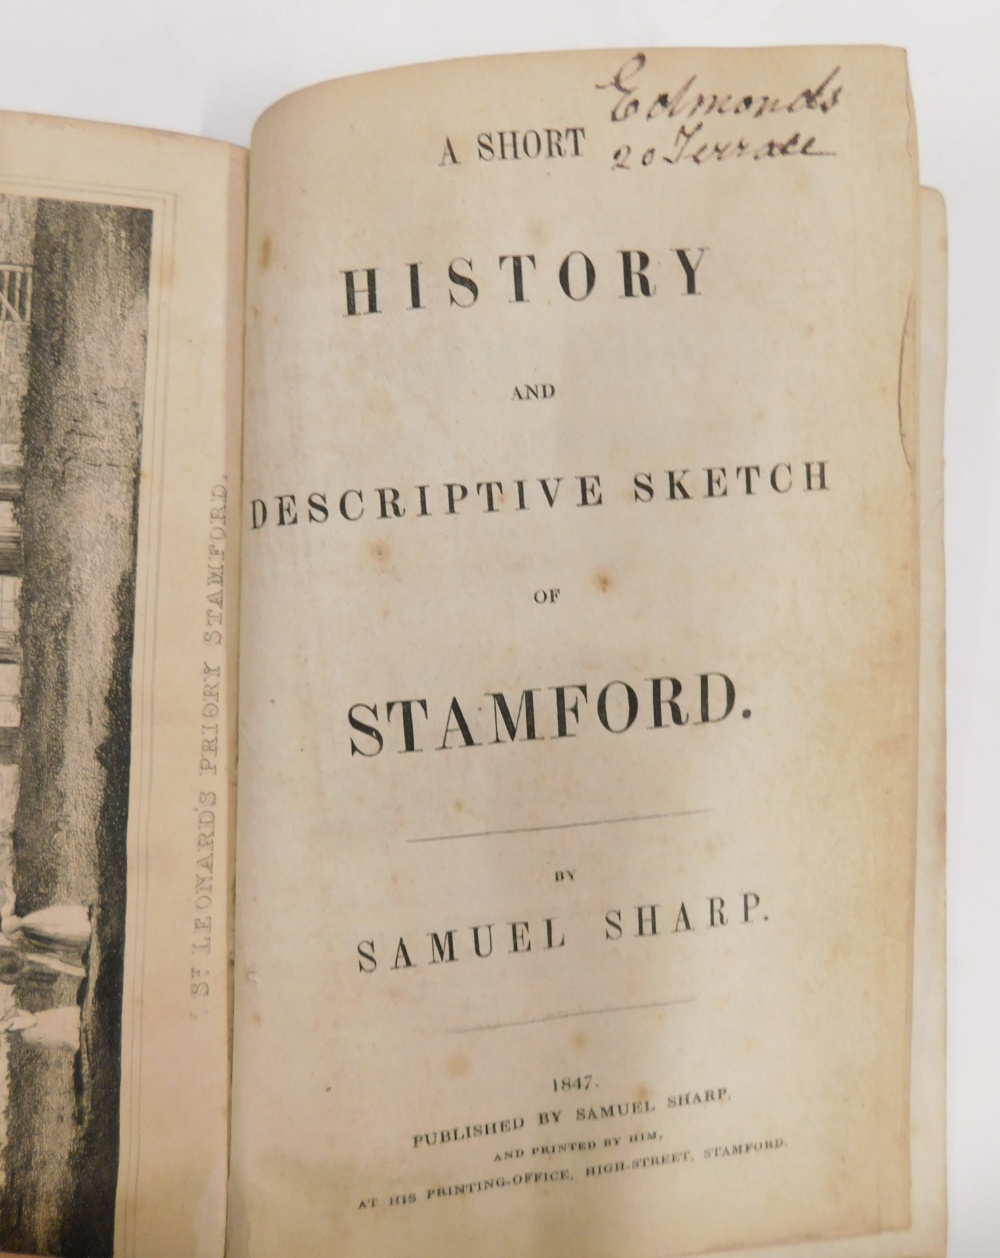 Kesteven.- c. 50 books and pamphlets relating to the history of Kesteven, particularly Stamford. - Image 6 of 6